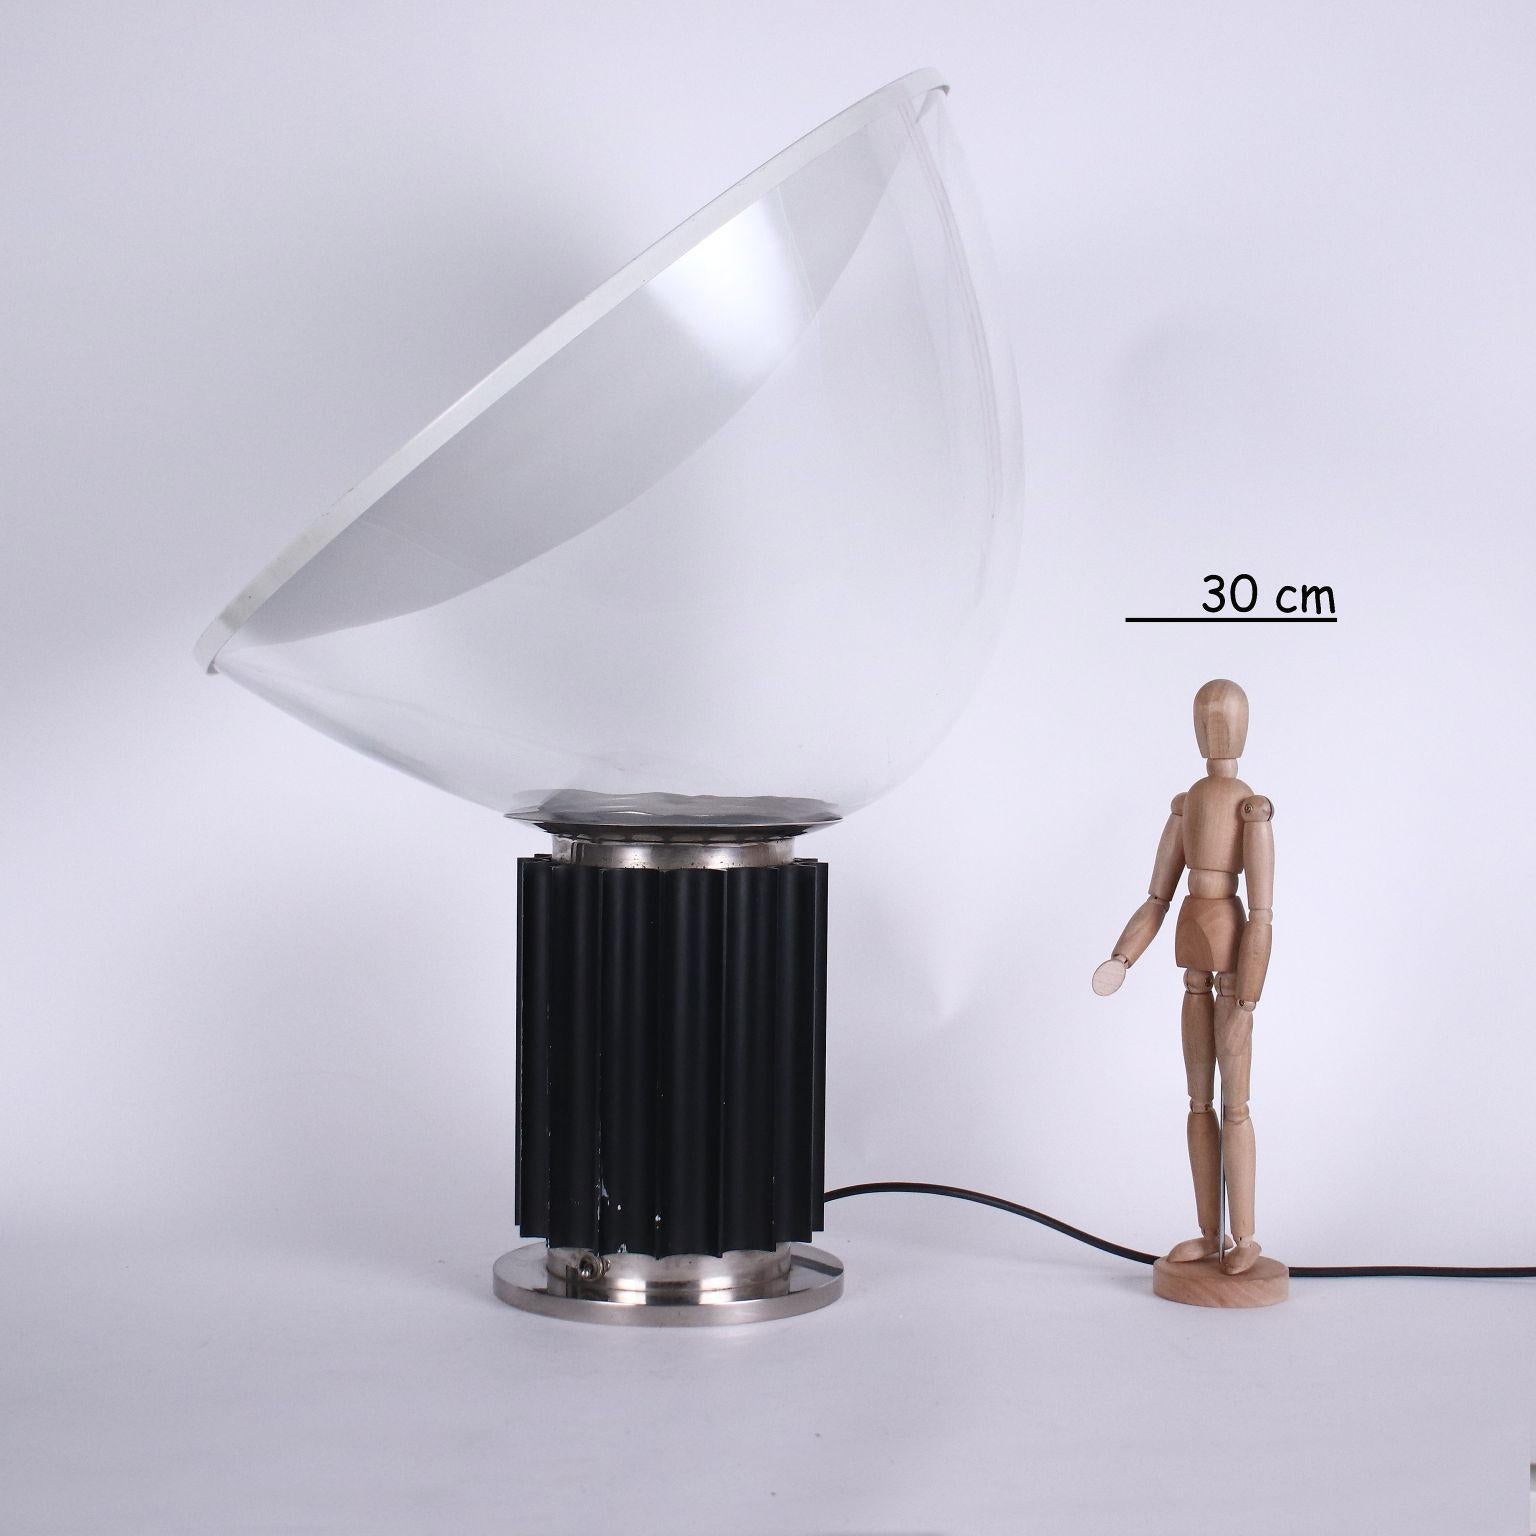 Table lamp with adjustable indirect light diffuser. Metal and aluminum base, glass and aluminum diffuser.